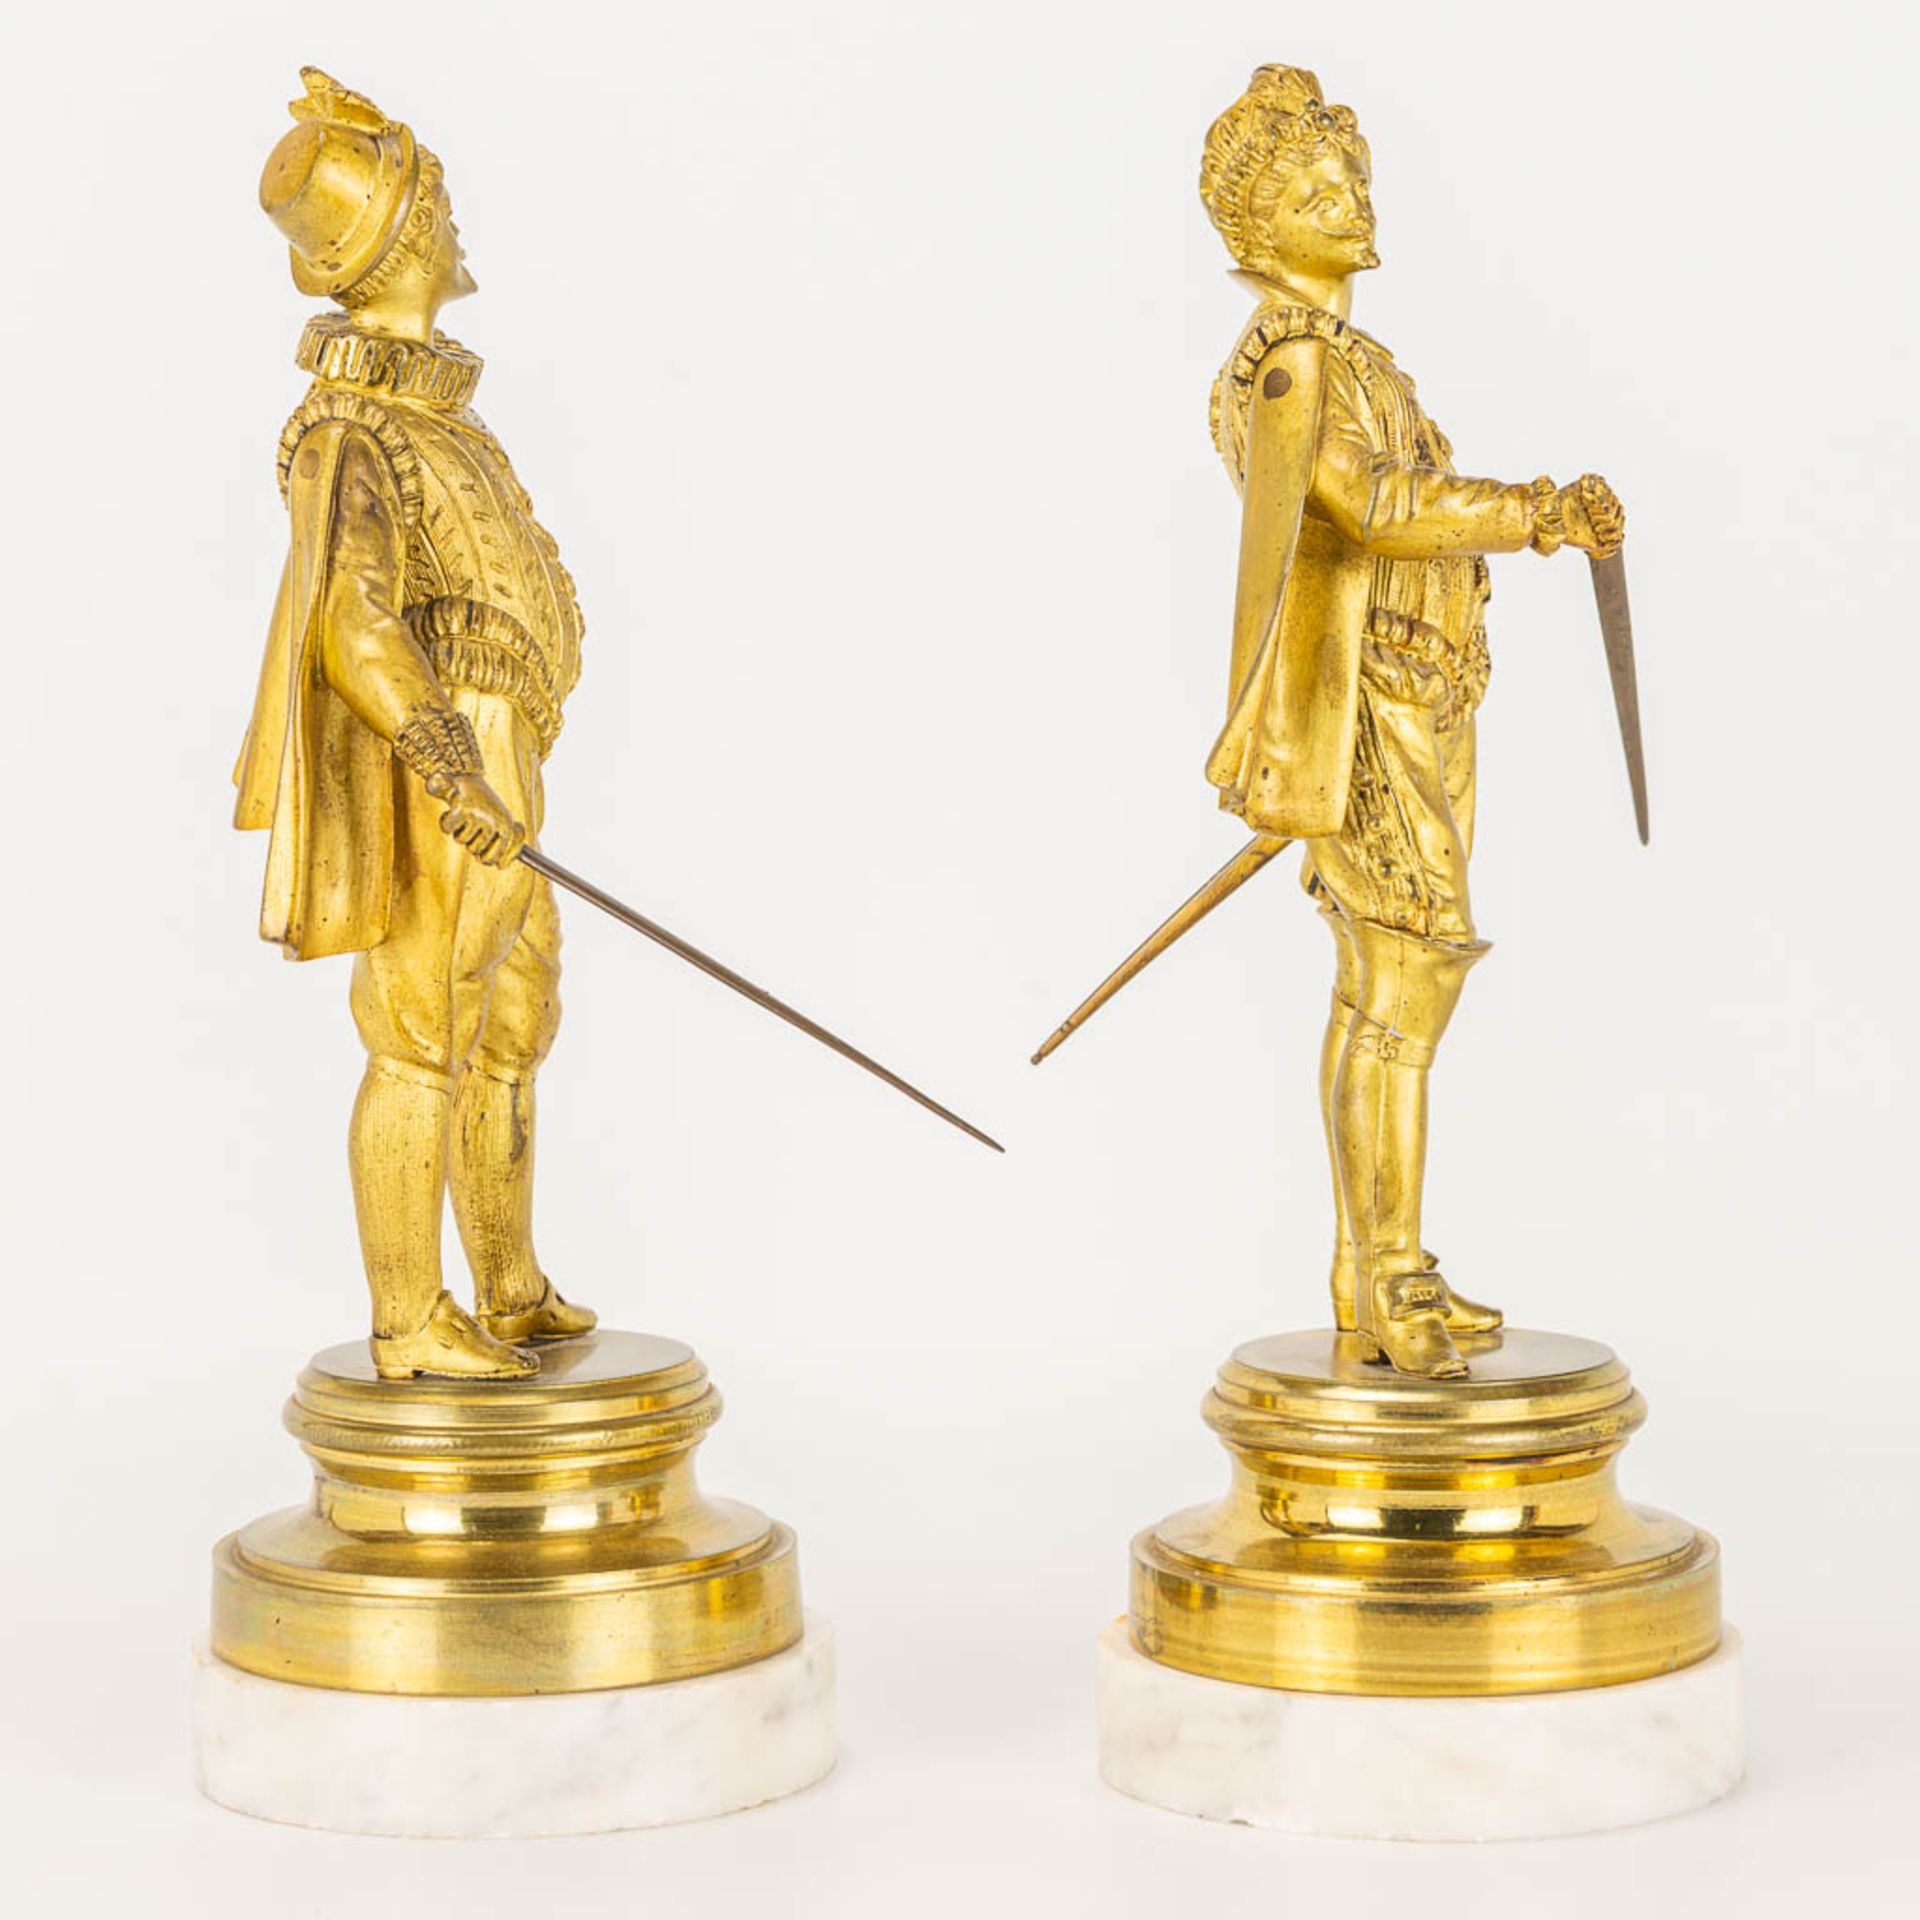 A pair of gilt Conquistadores statues made of gilt bronze and standing on a white marble base. - Image 4 of 9